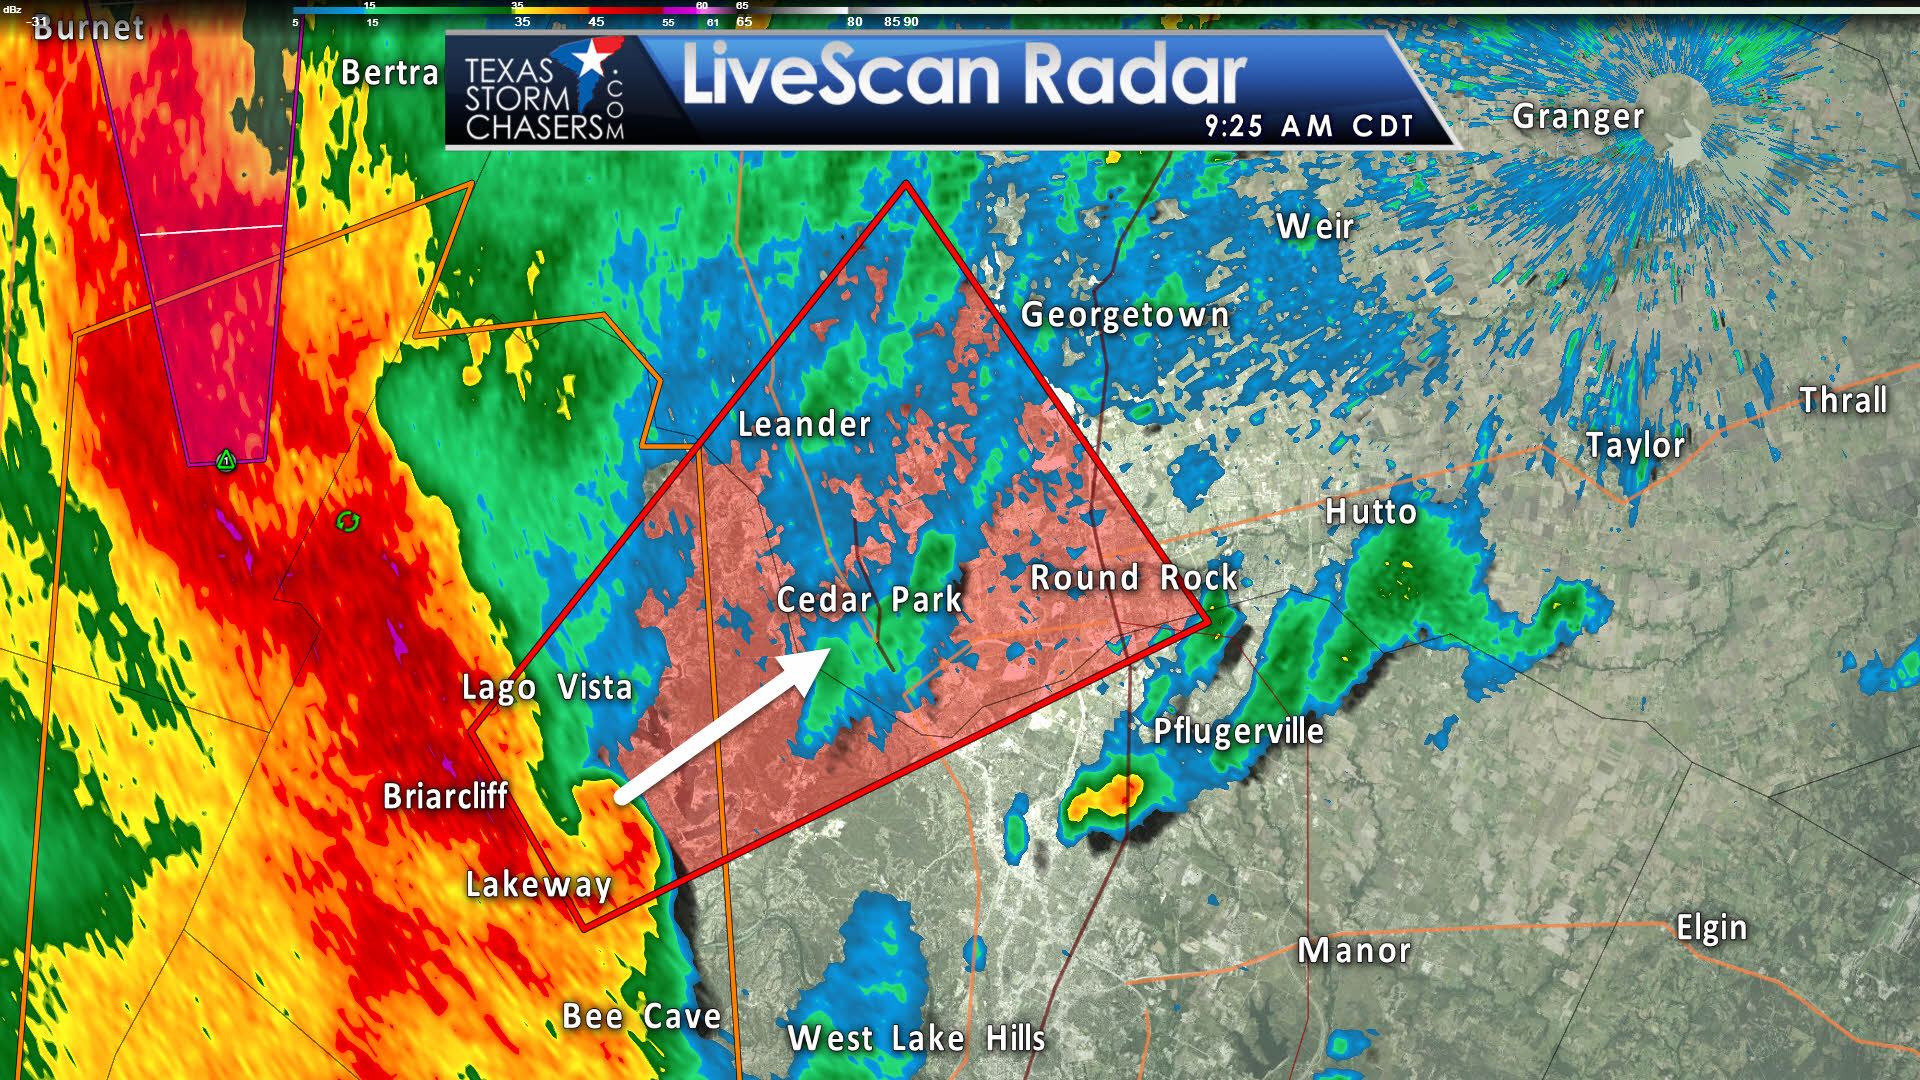 Tornado Warning: Travis & Williamson Counties (C TX) till 1015AM • Texas Storm Chasers1920 x 1080